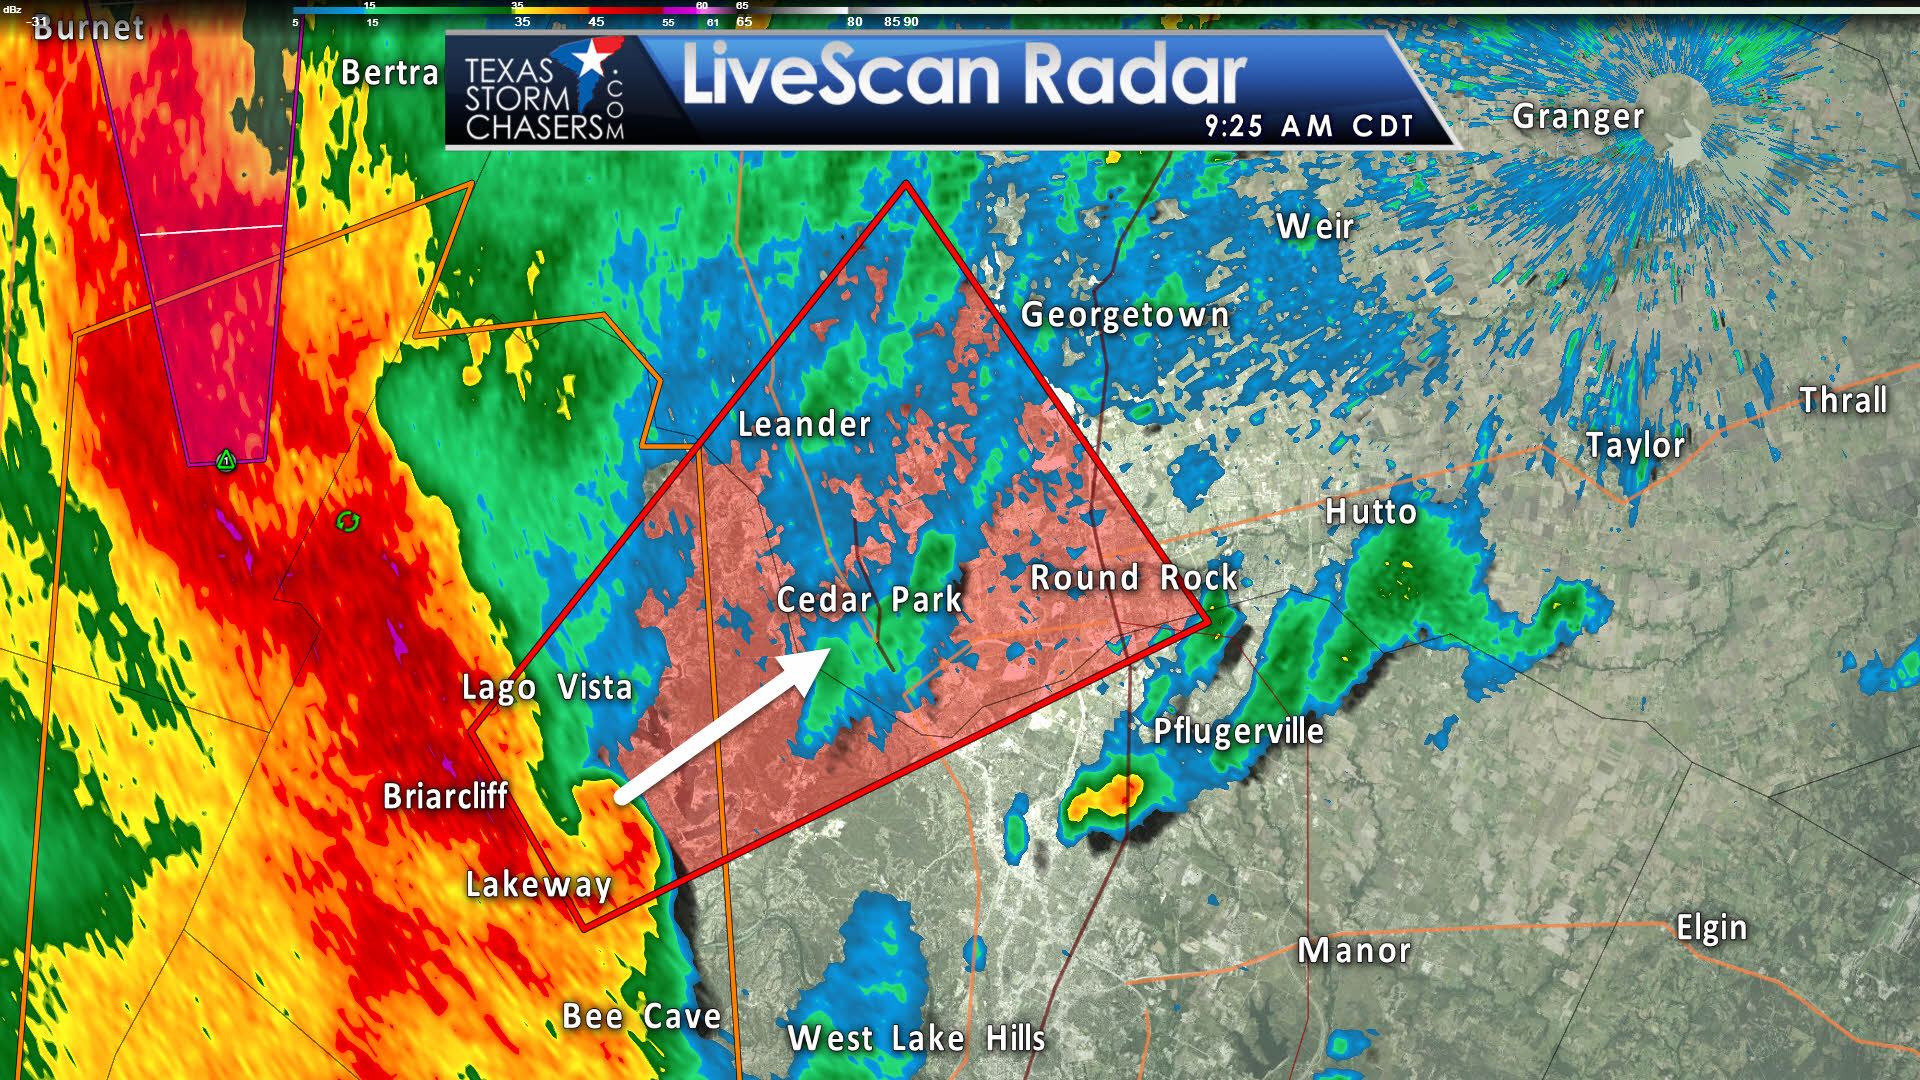 Tornado Warning: Travis & Williamson Counties (C TX) till 1015AM • Texas Storm Chasers1920 x 1080